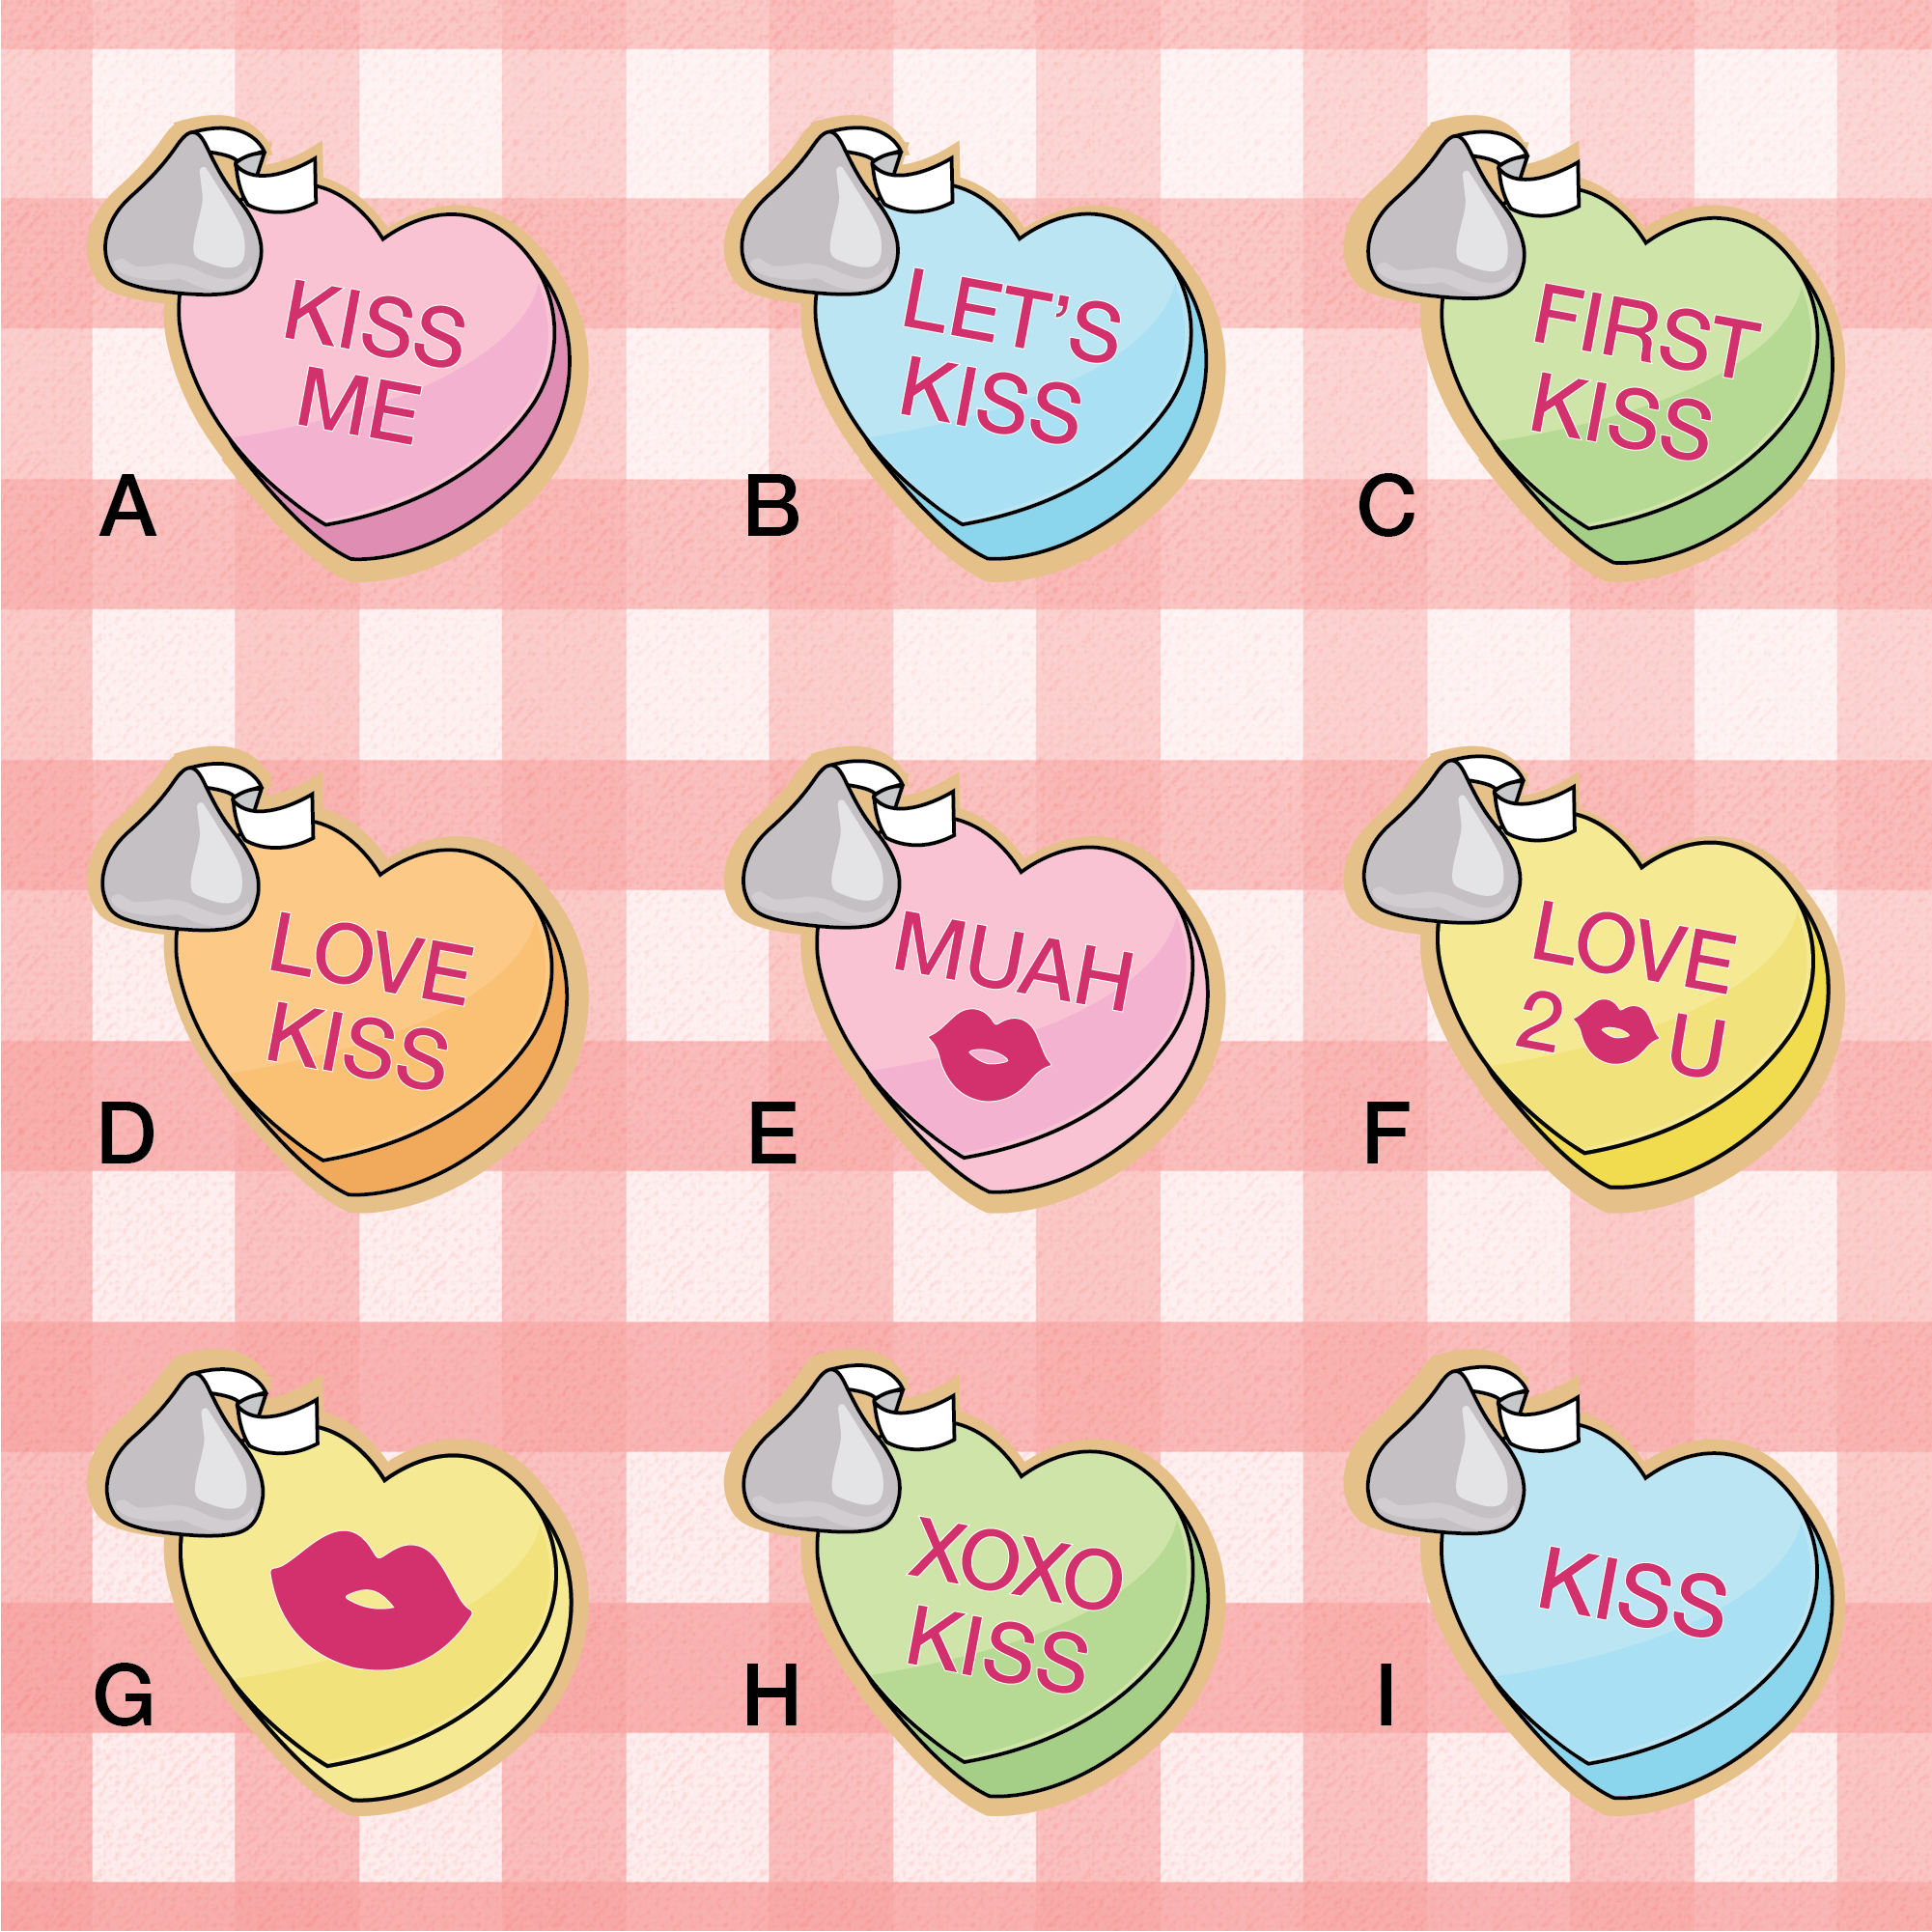 Love, Hearts & Valentines Collection – Tagged love bug latte– Cut It Out  Cutters